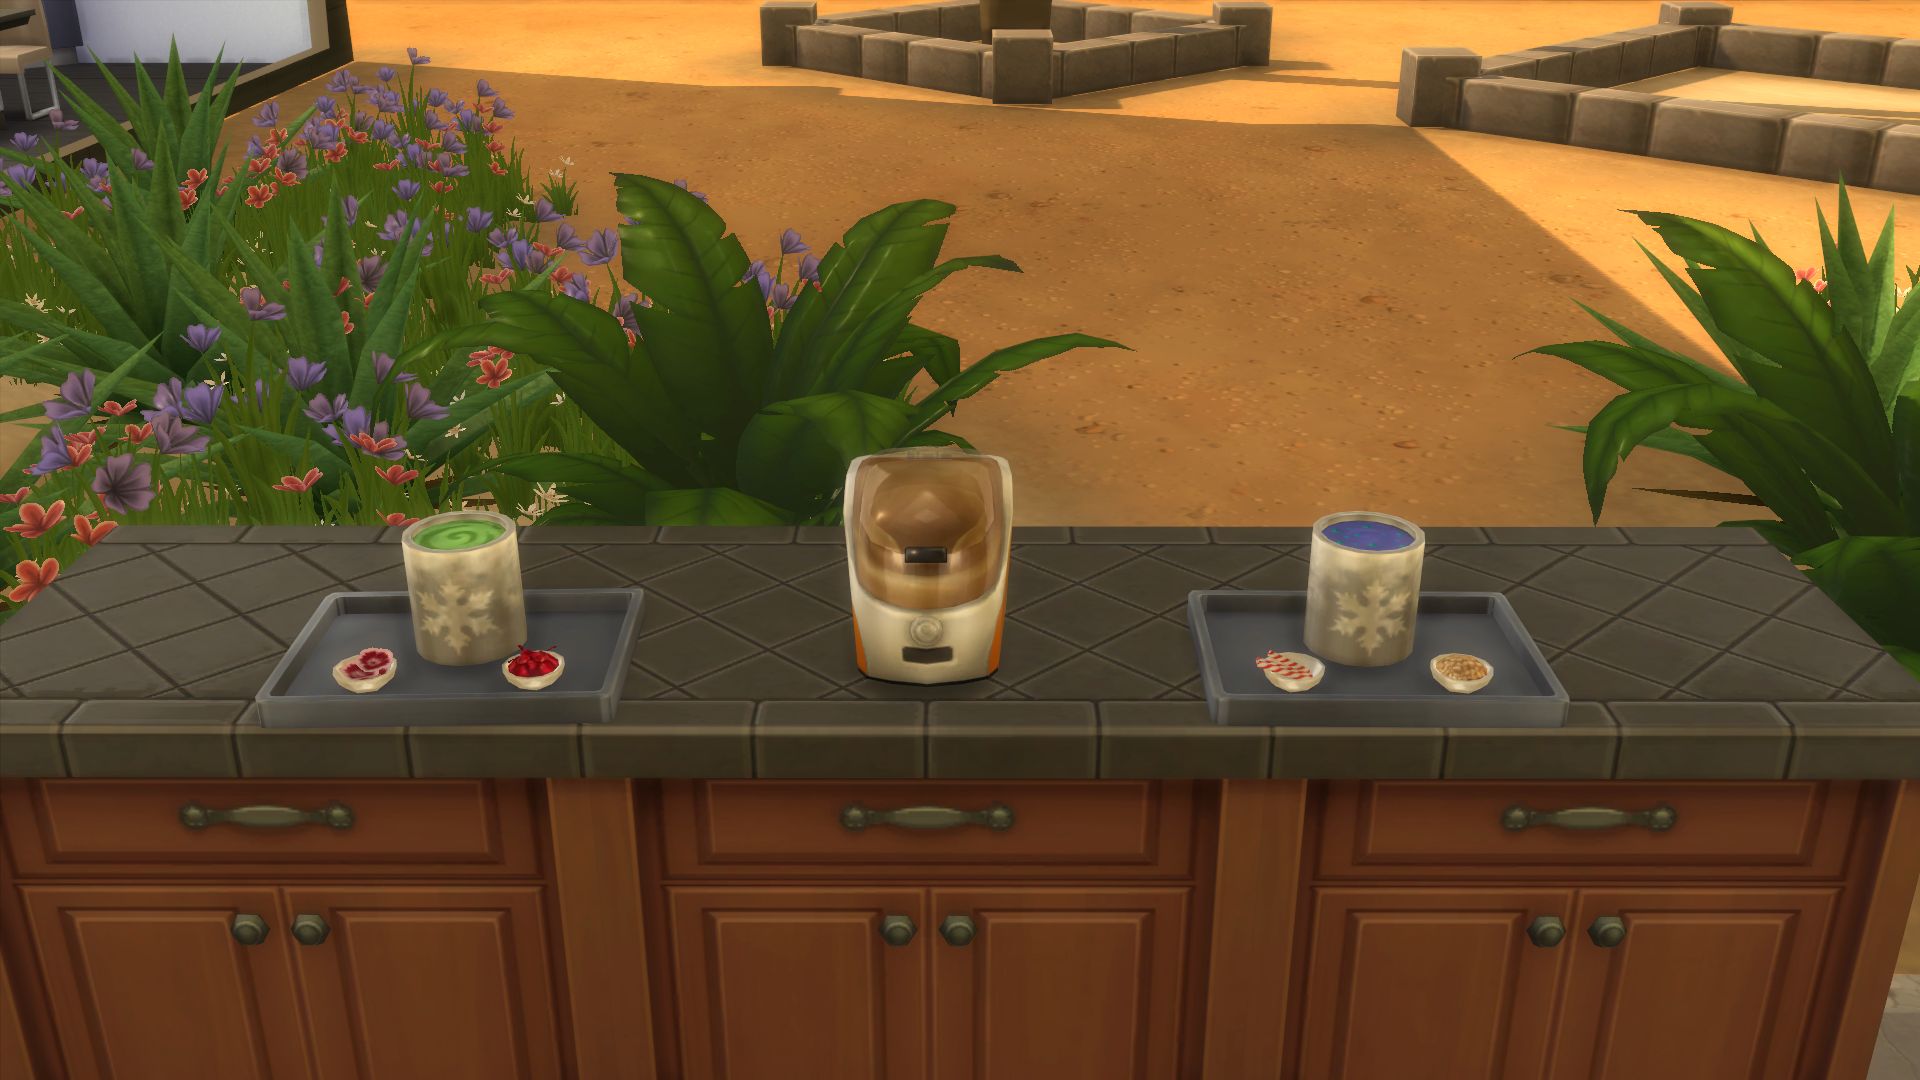 https://www.carls-sims-4-guide.com/gamepictures/stuffpacks/coolkitchen/large/IceCreamTubs.jpg